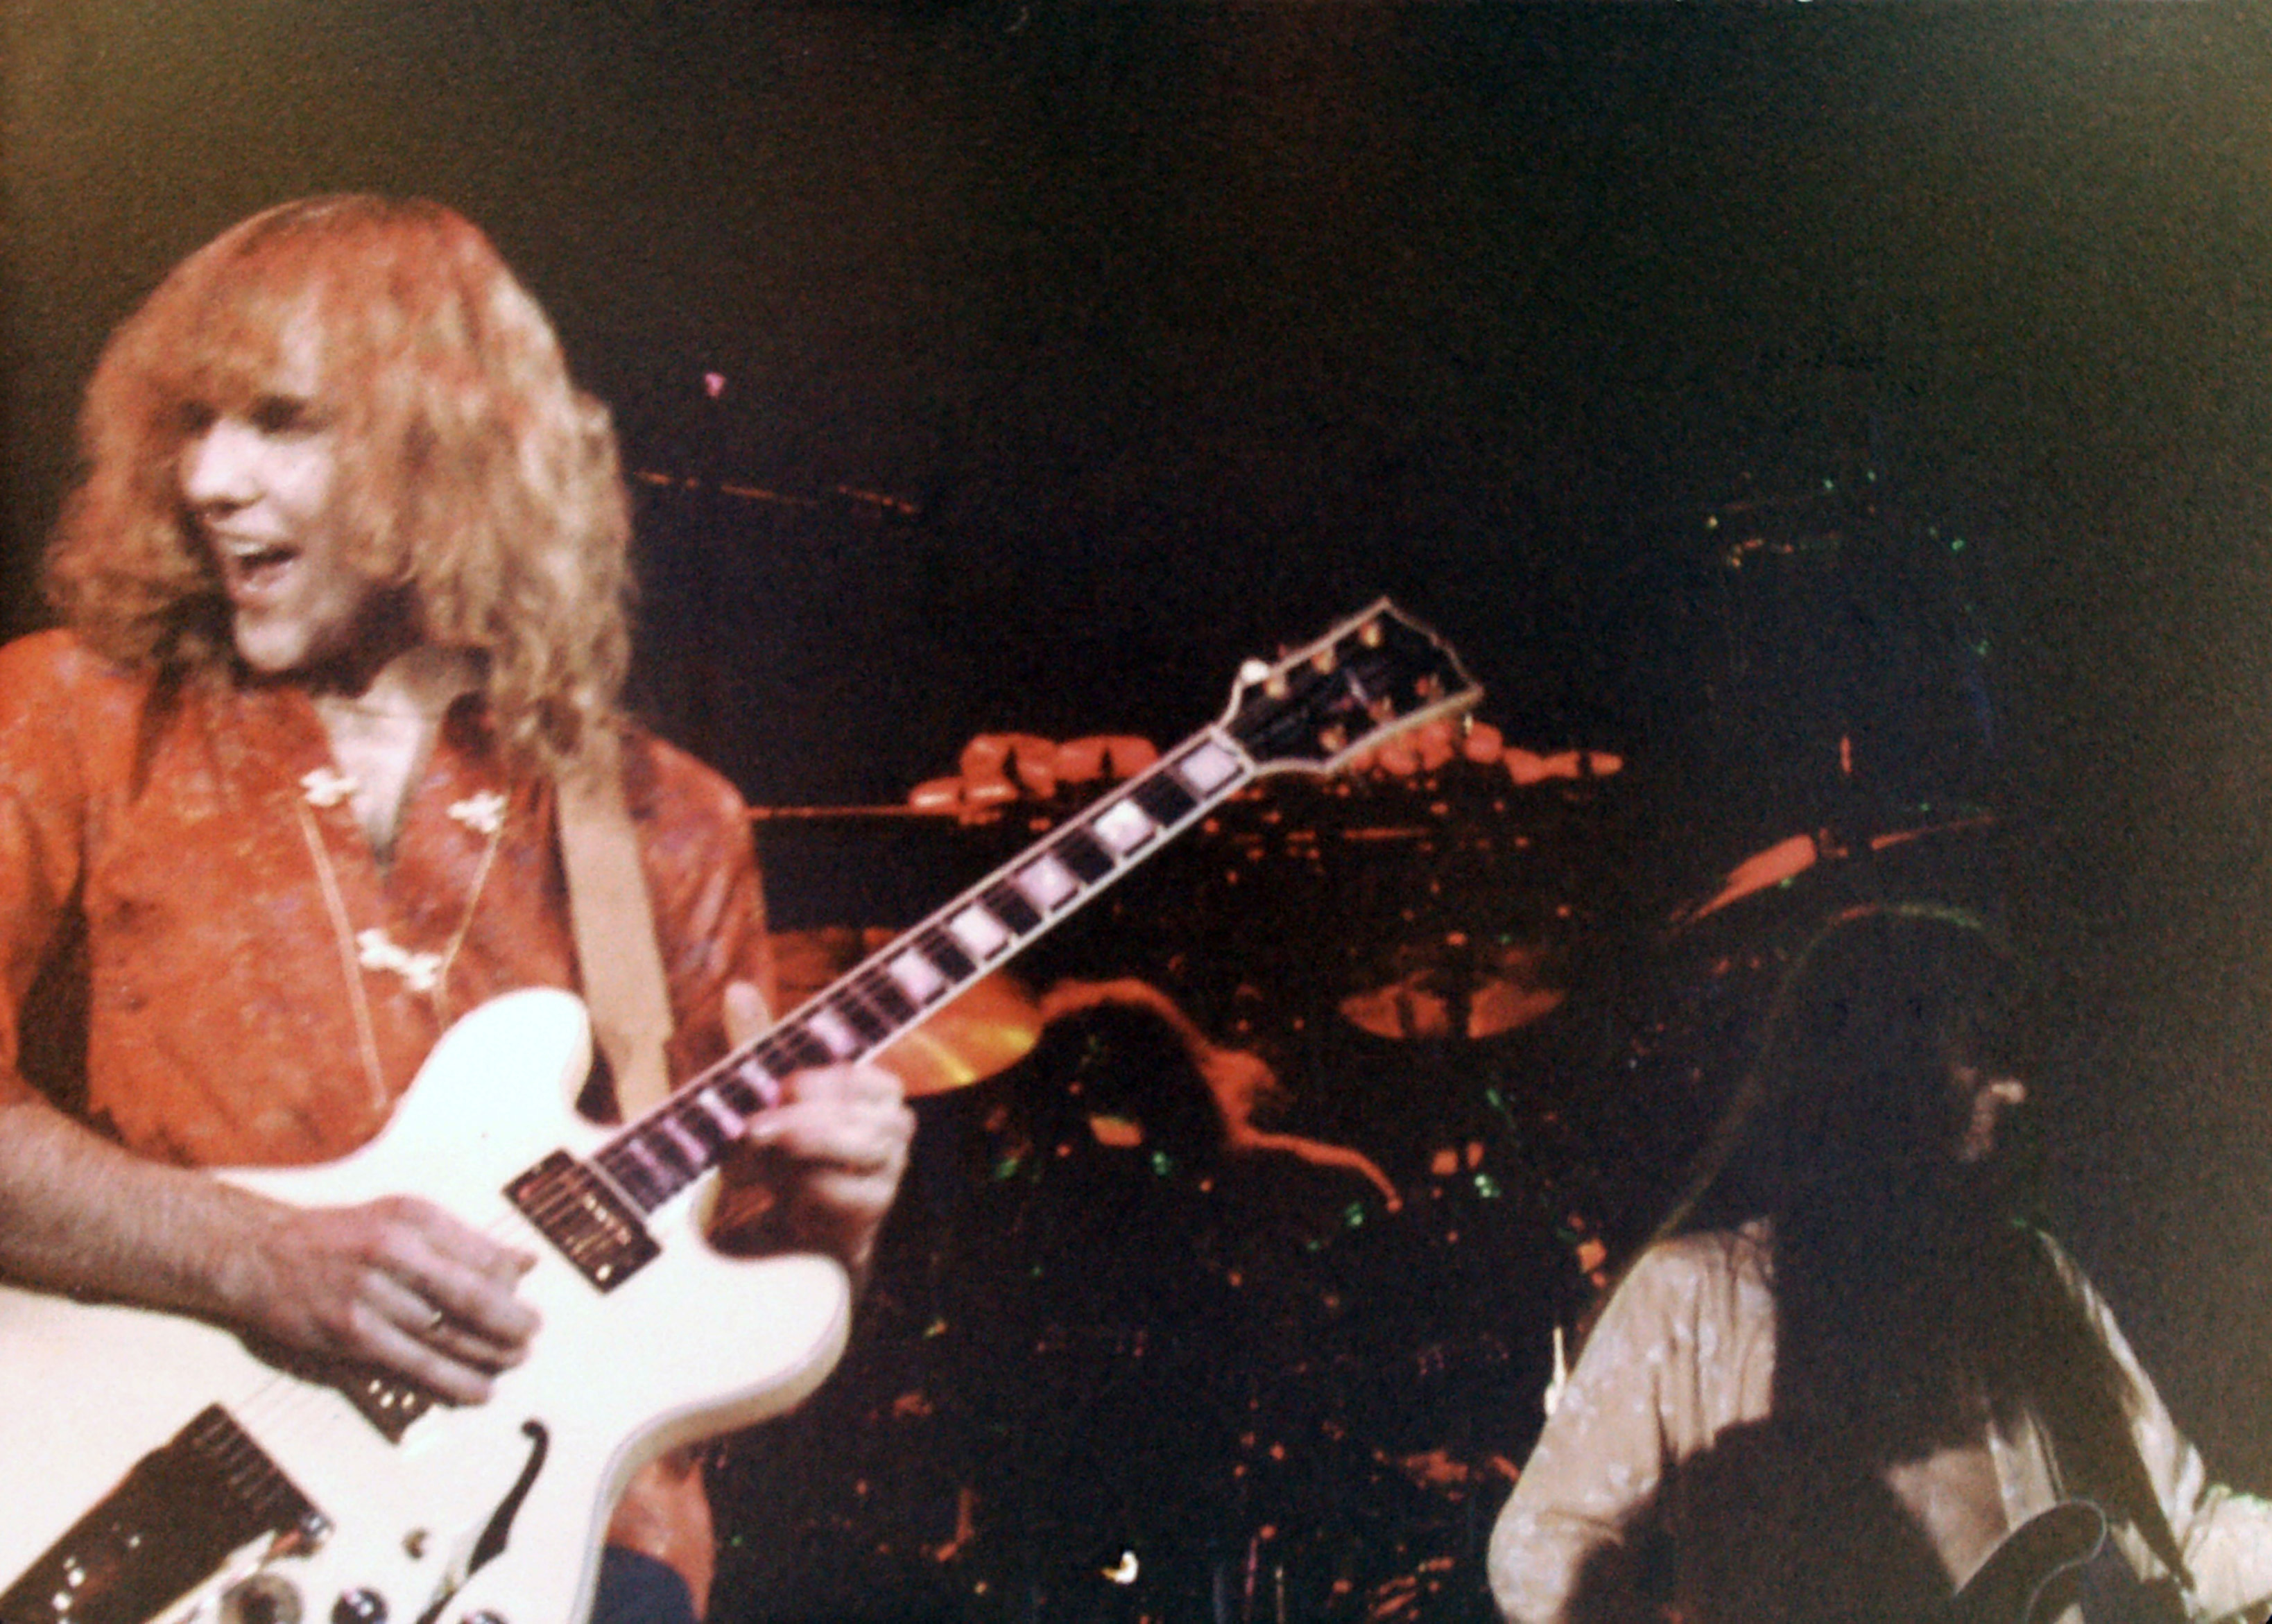 Rush 'A Farewell to Kings' Tour Pictures - Louisville Gardens - Louisville, Kentucky - January 19th, 1978